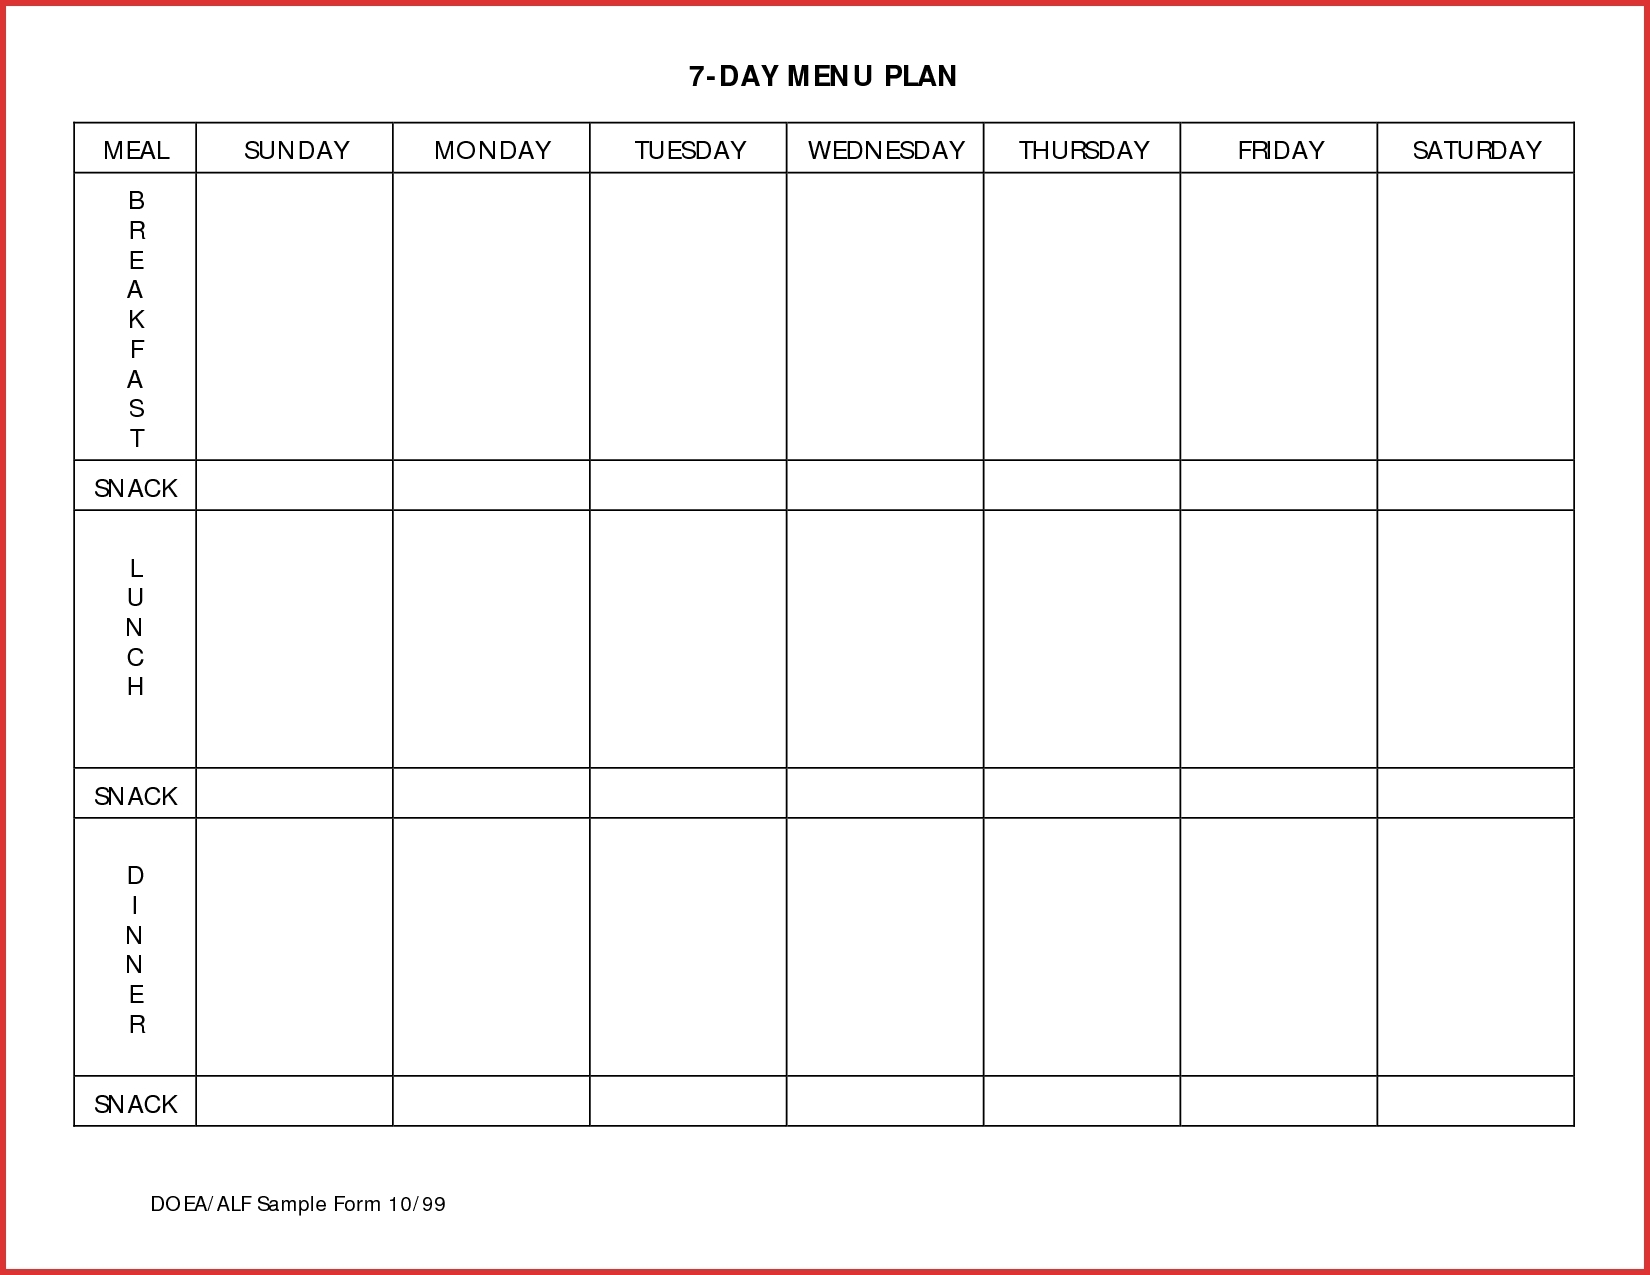 Day Event Schedule Template Plan Hourly Meal Printable Planner | Smorad with regard to 7 Day Employee Schedule Template